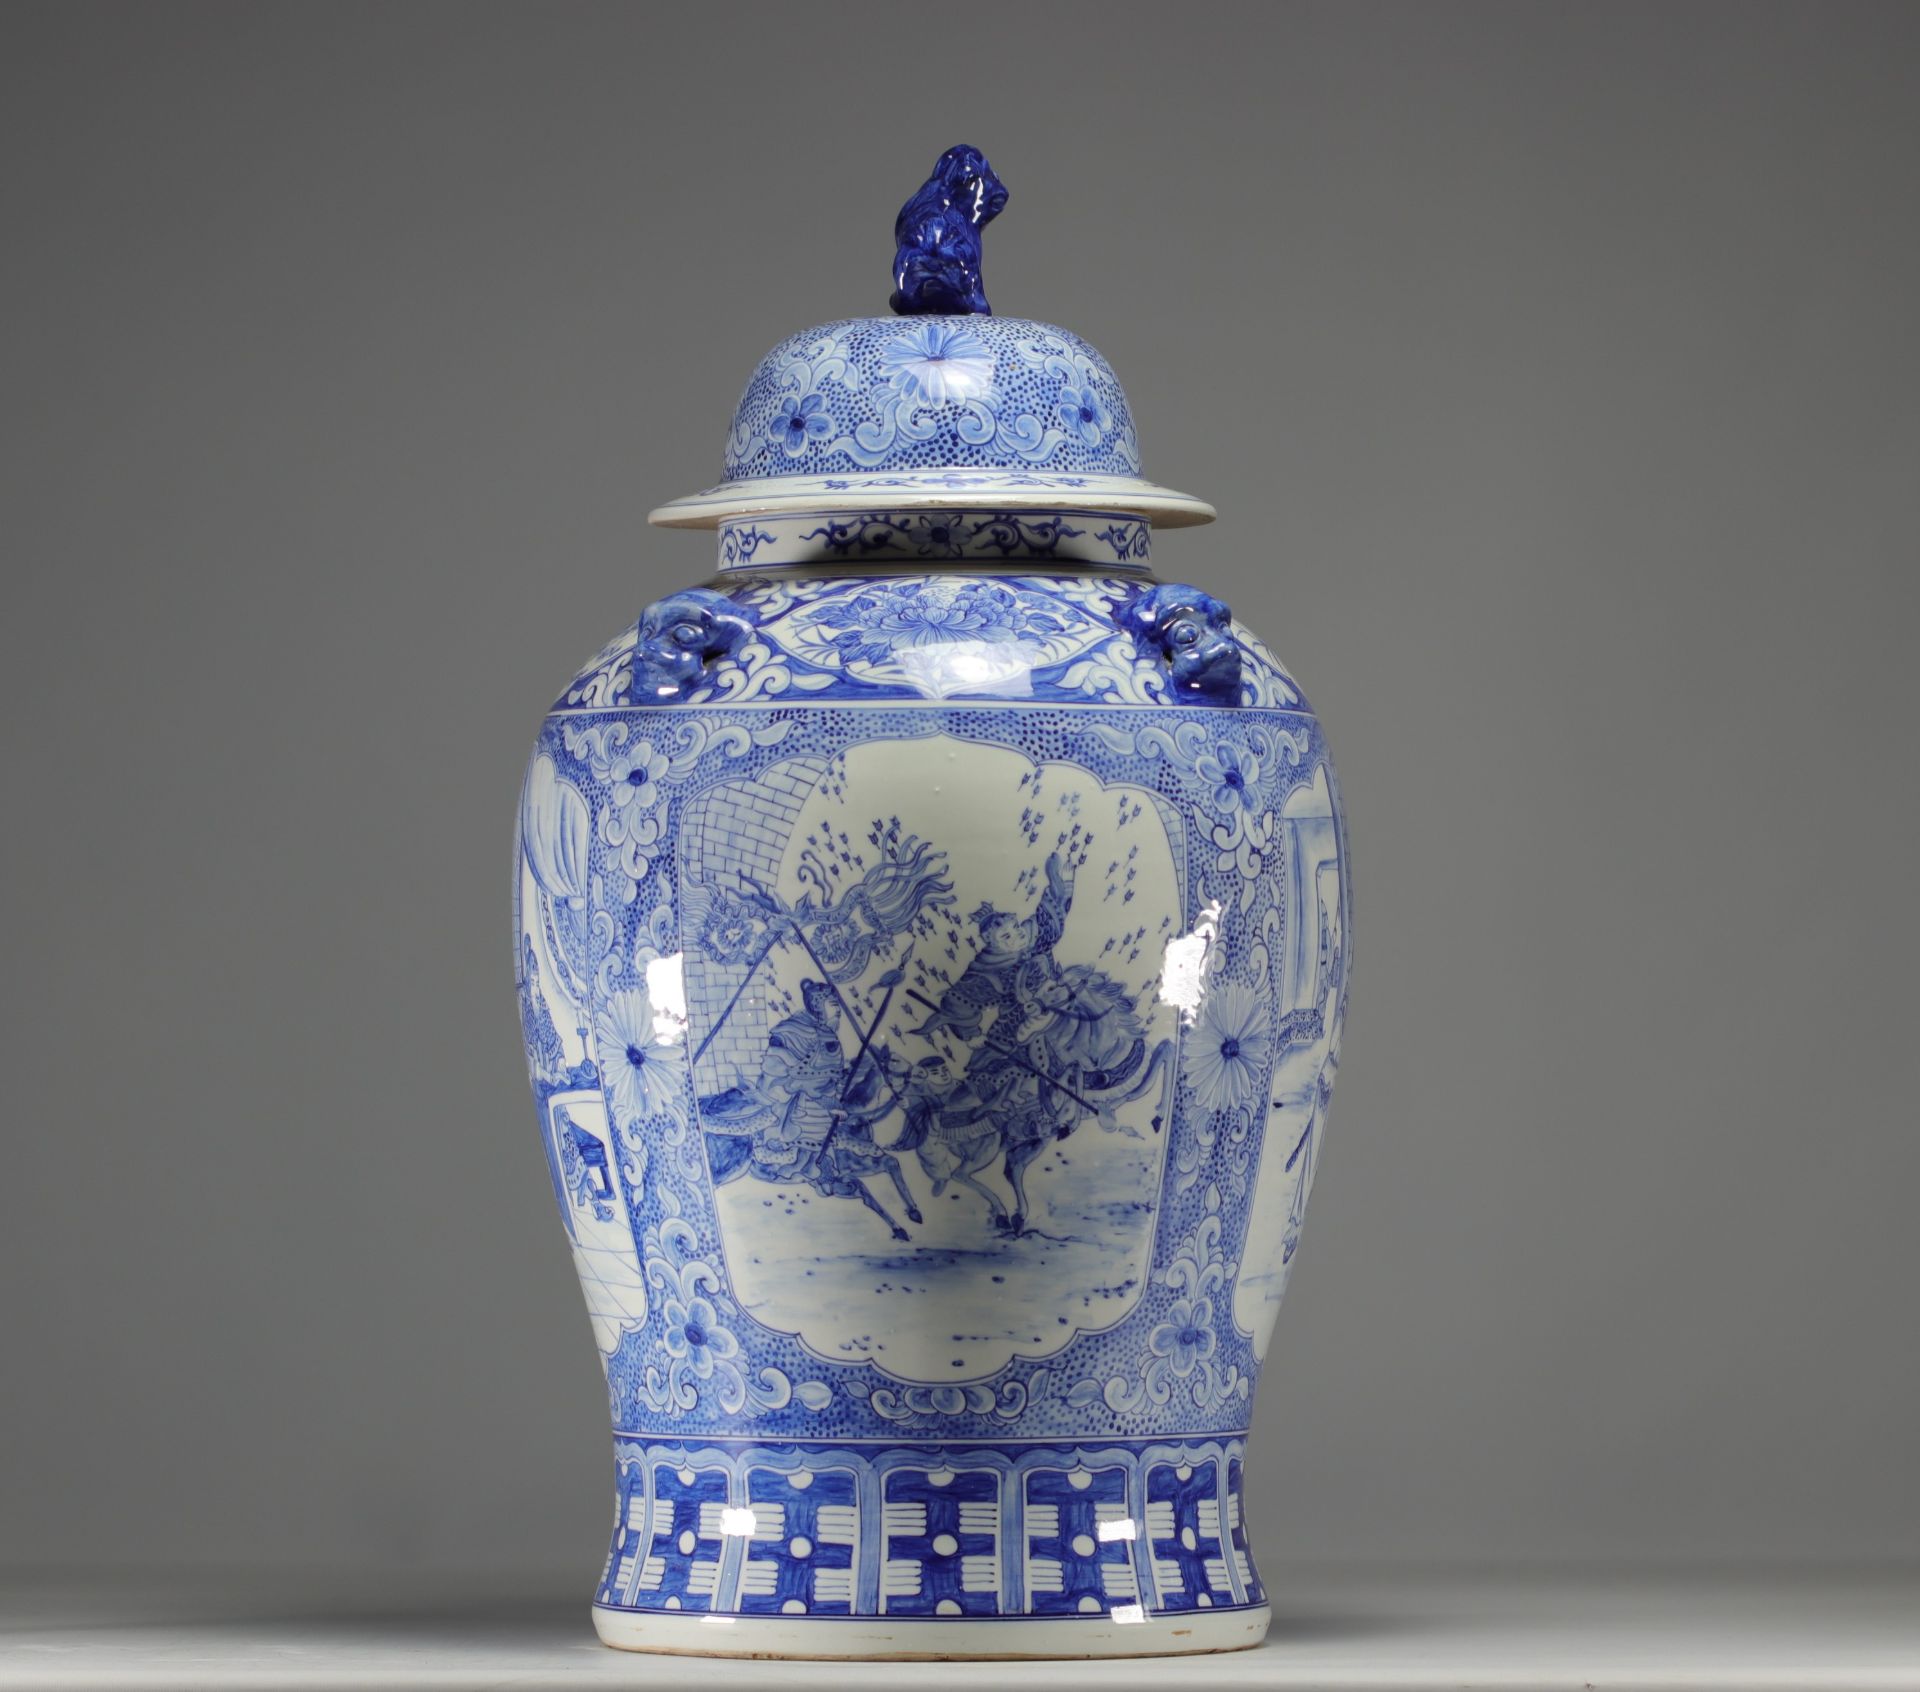 China - Large covered vase in white-blue porcelain with cartouche decoration - Image 3 of 5